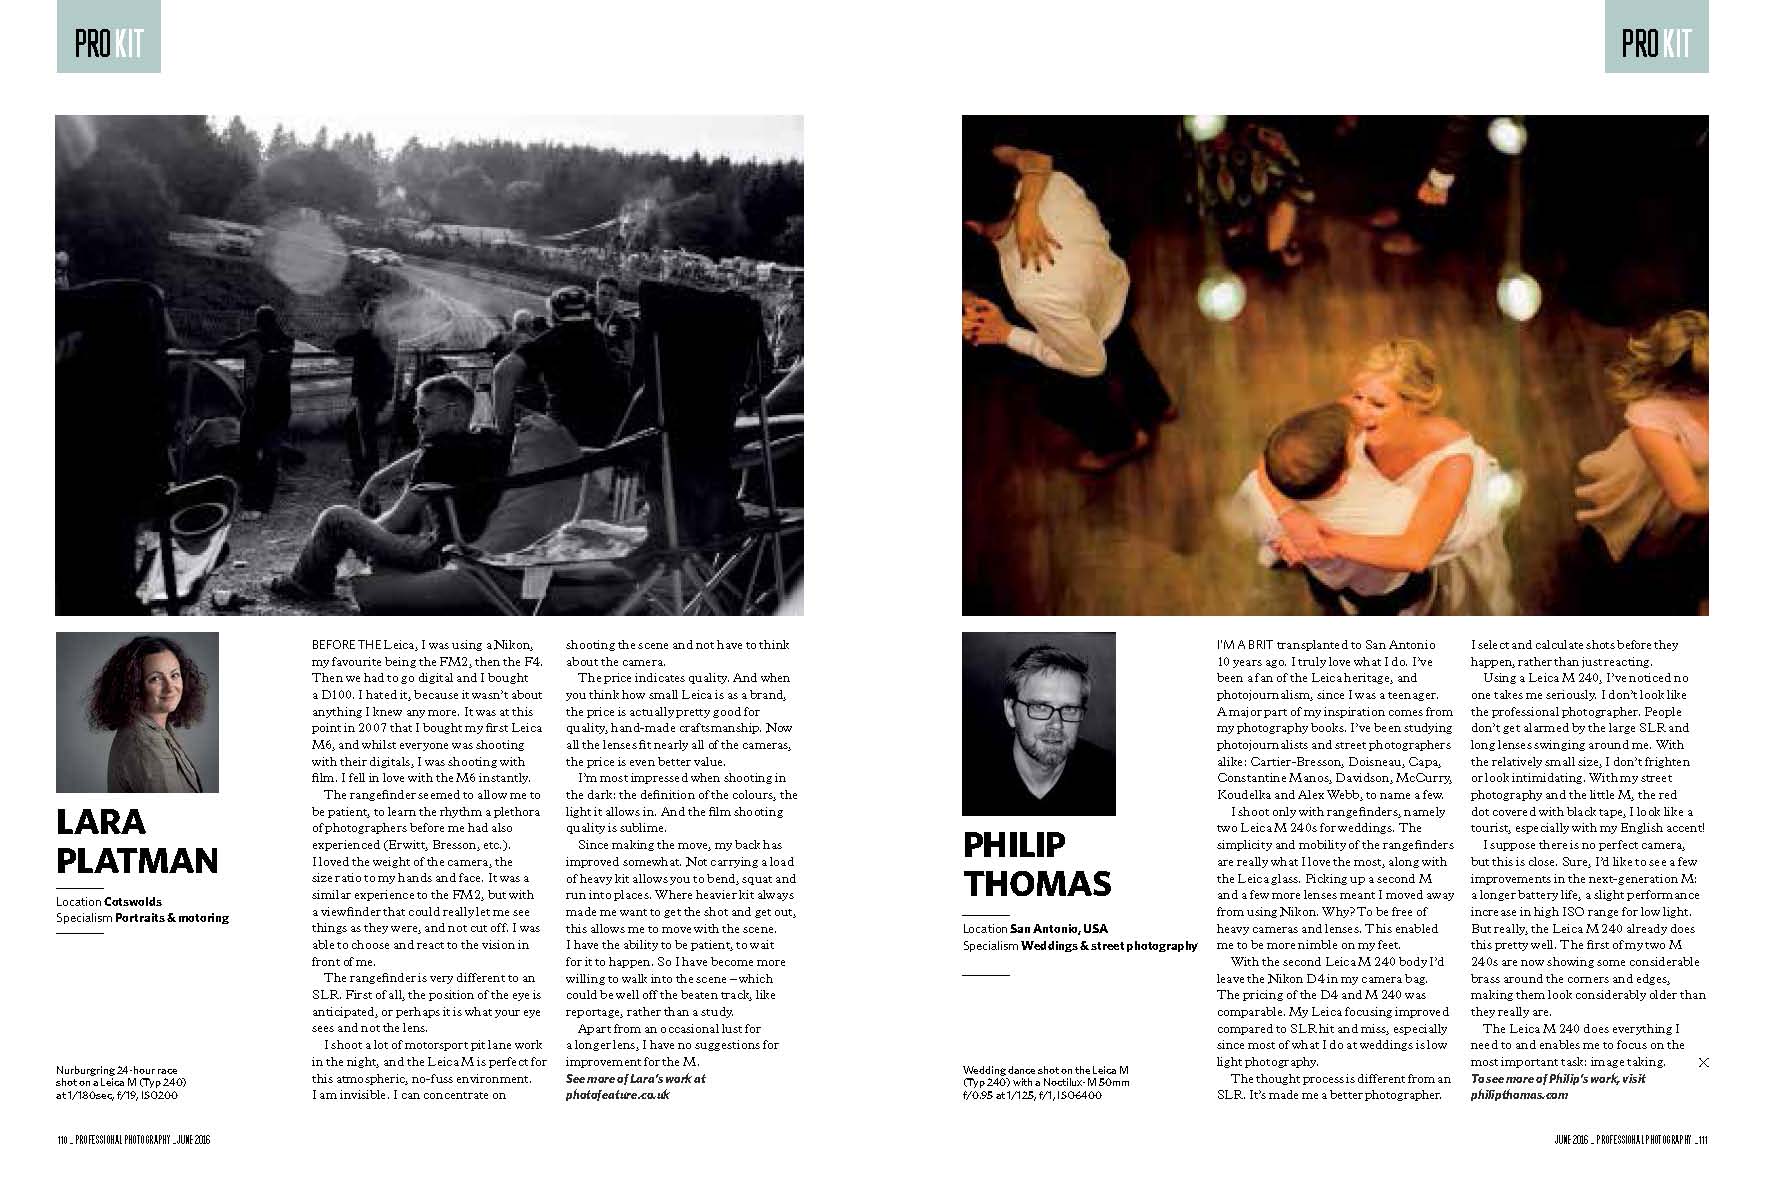 Professional Photography - 3 Pro photographers use the Leica M (Typ 240) as their workhorse give their verdicts Page 2 0f 2